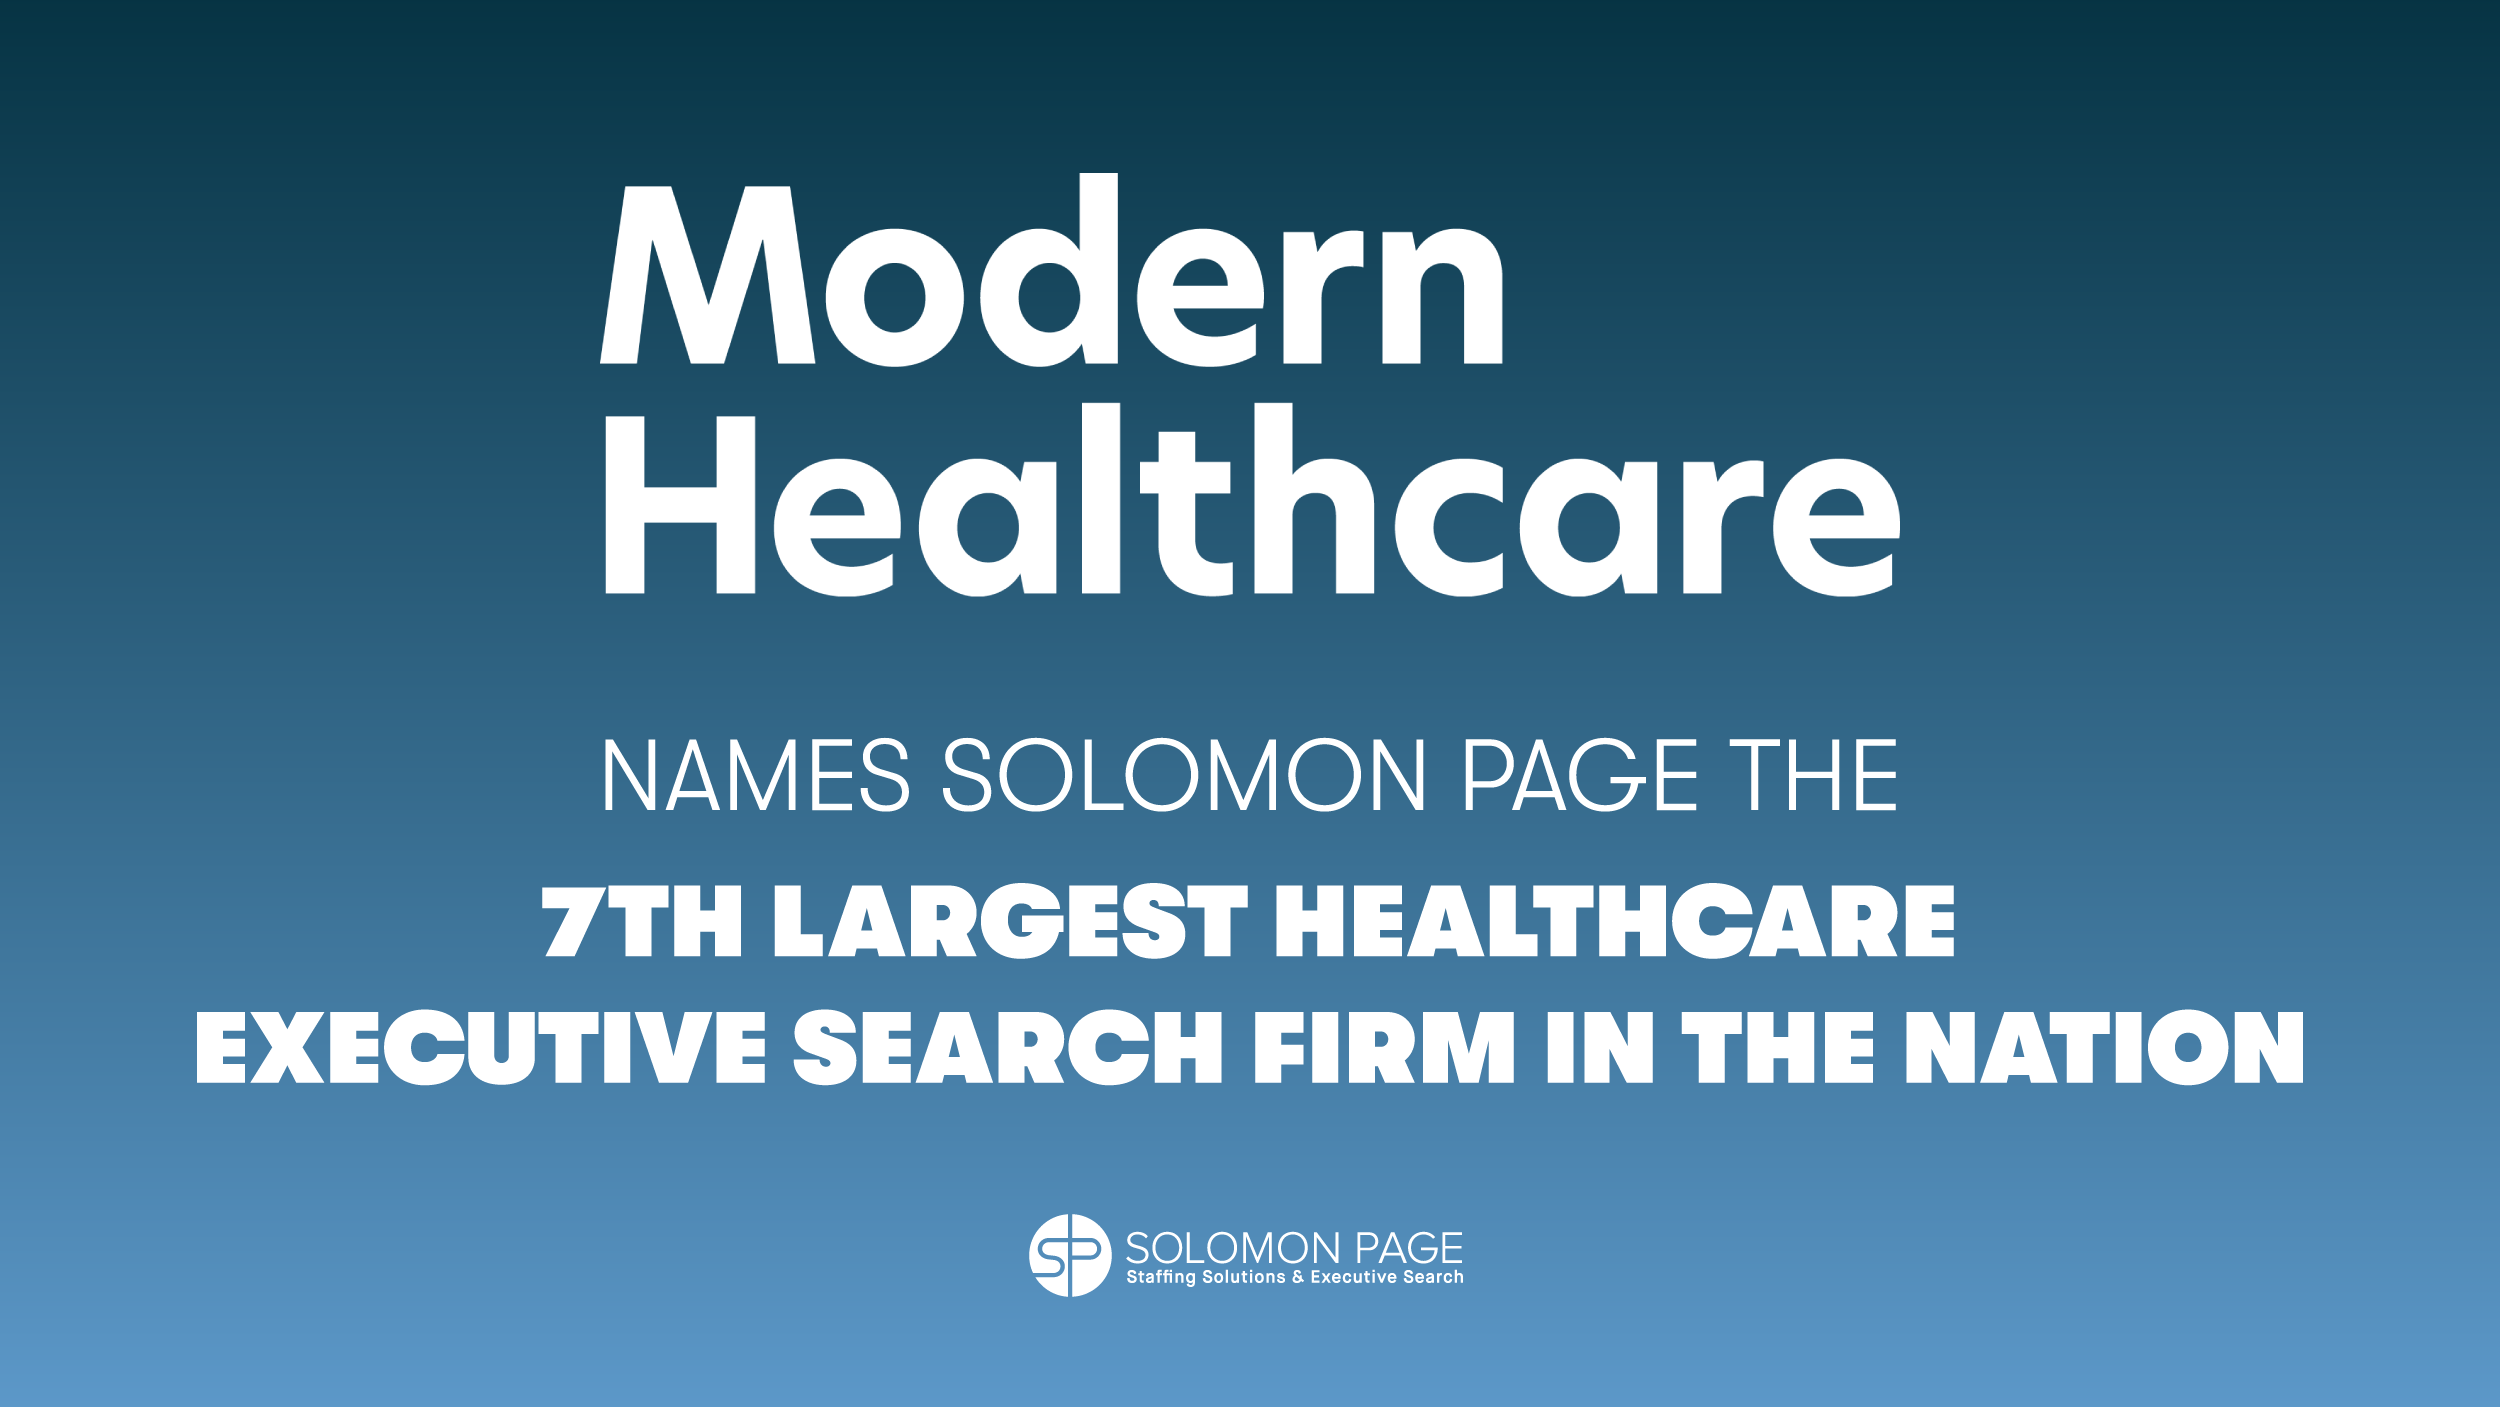 Modern Healthcare Names Solomon Page as One of the Largest Healthcare Executive Search Firms in the Nation